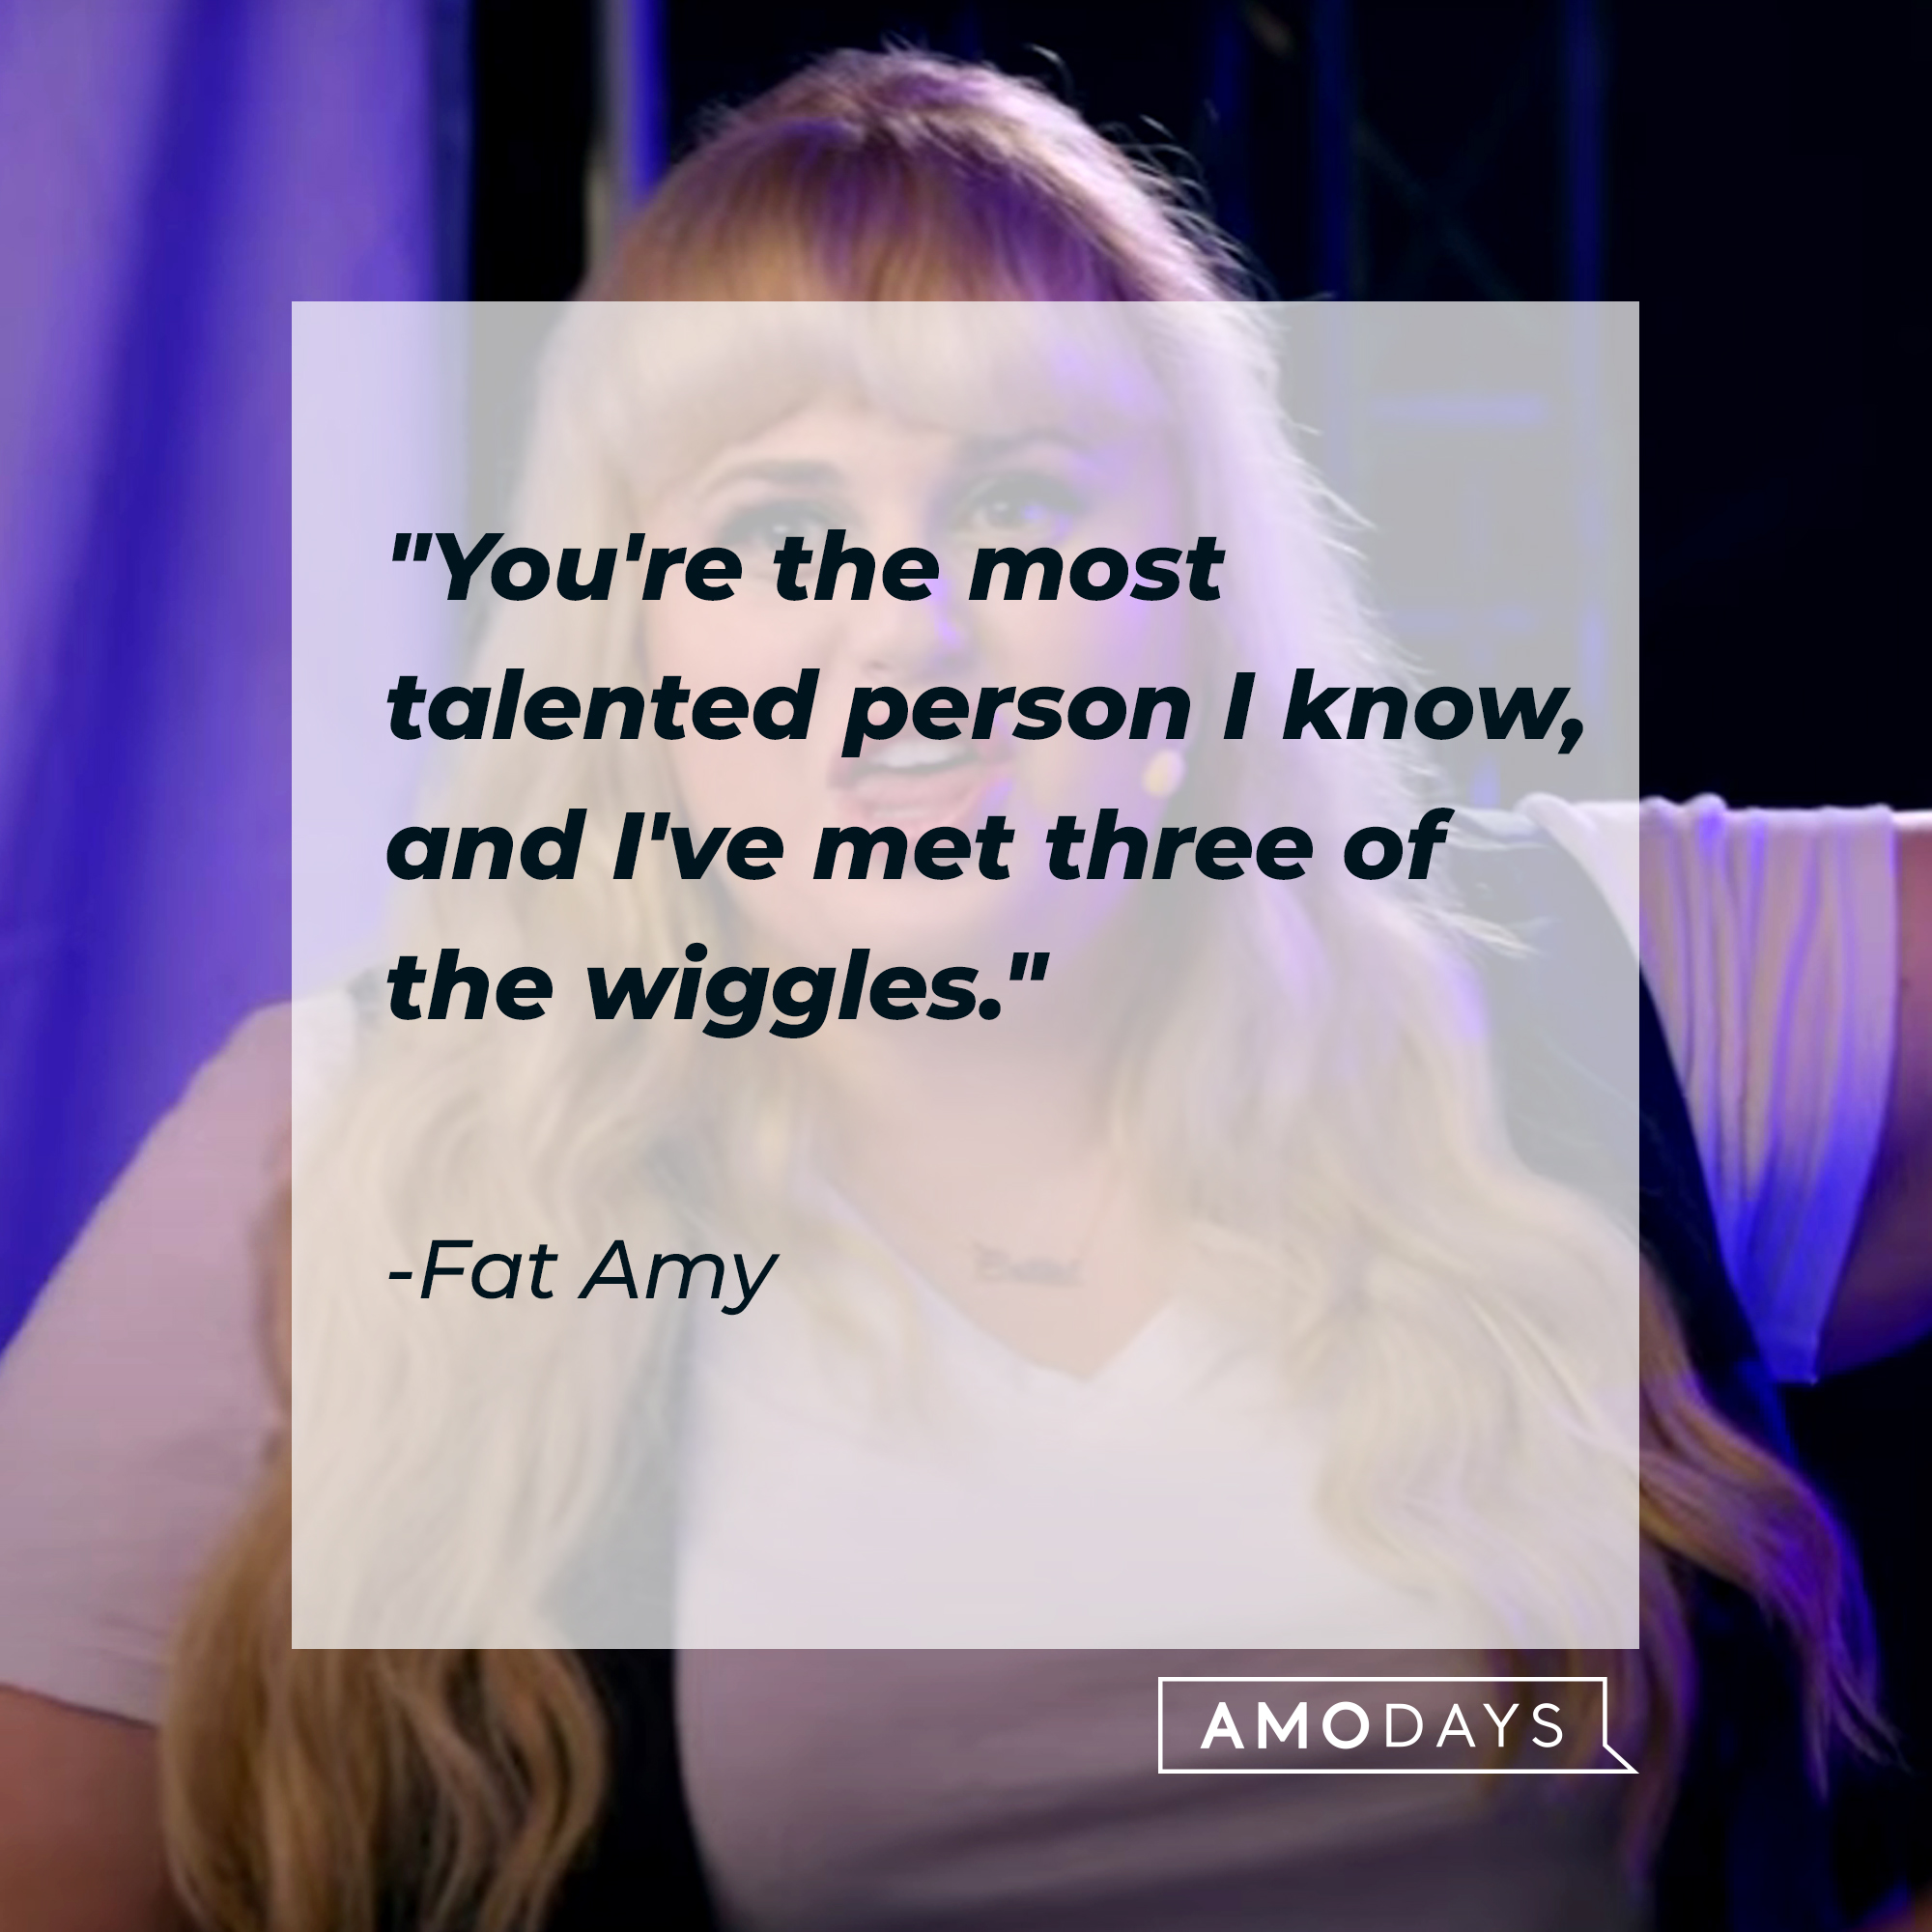 The Fat Amy quote, "You're the most talented person I know, and I've met three of the wiggles." | Source: youtube.com/PitchPerfect